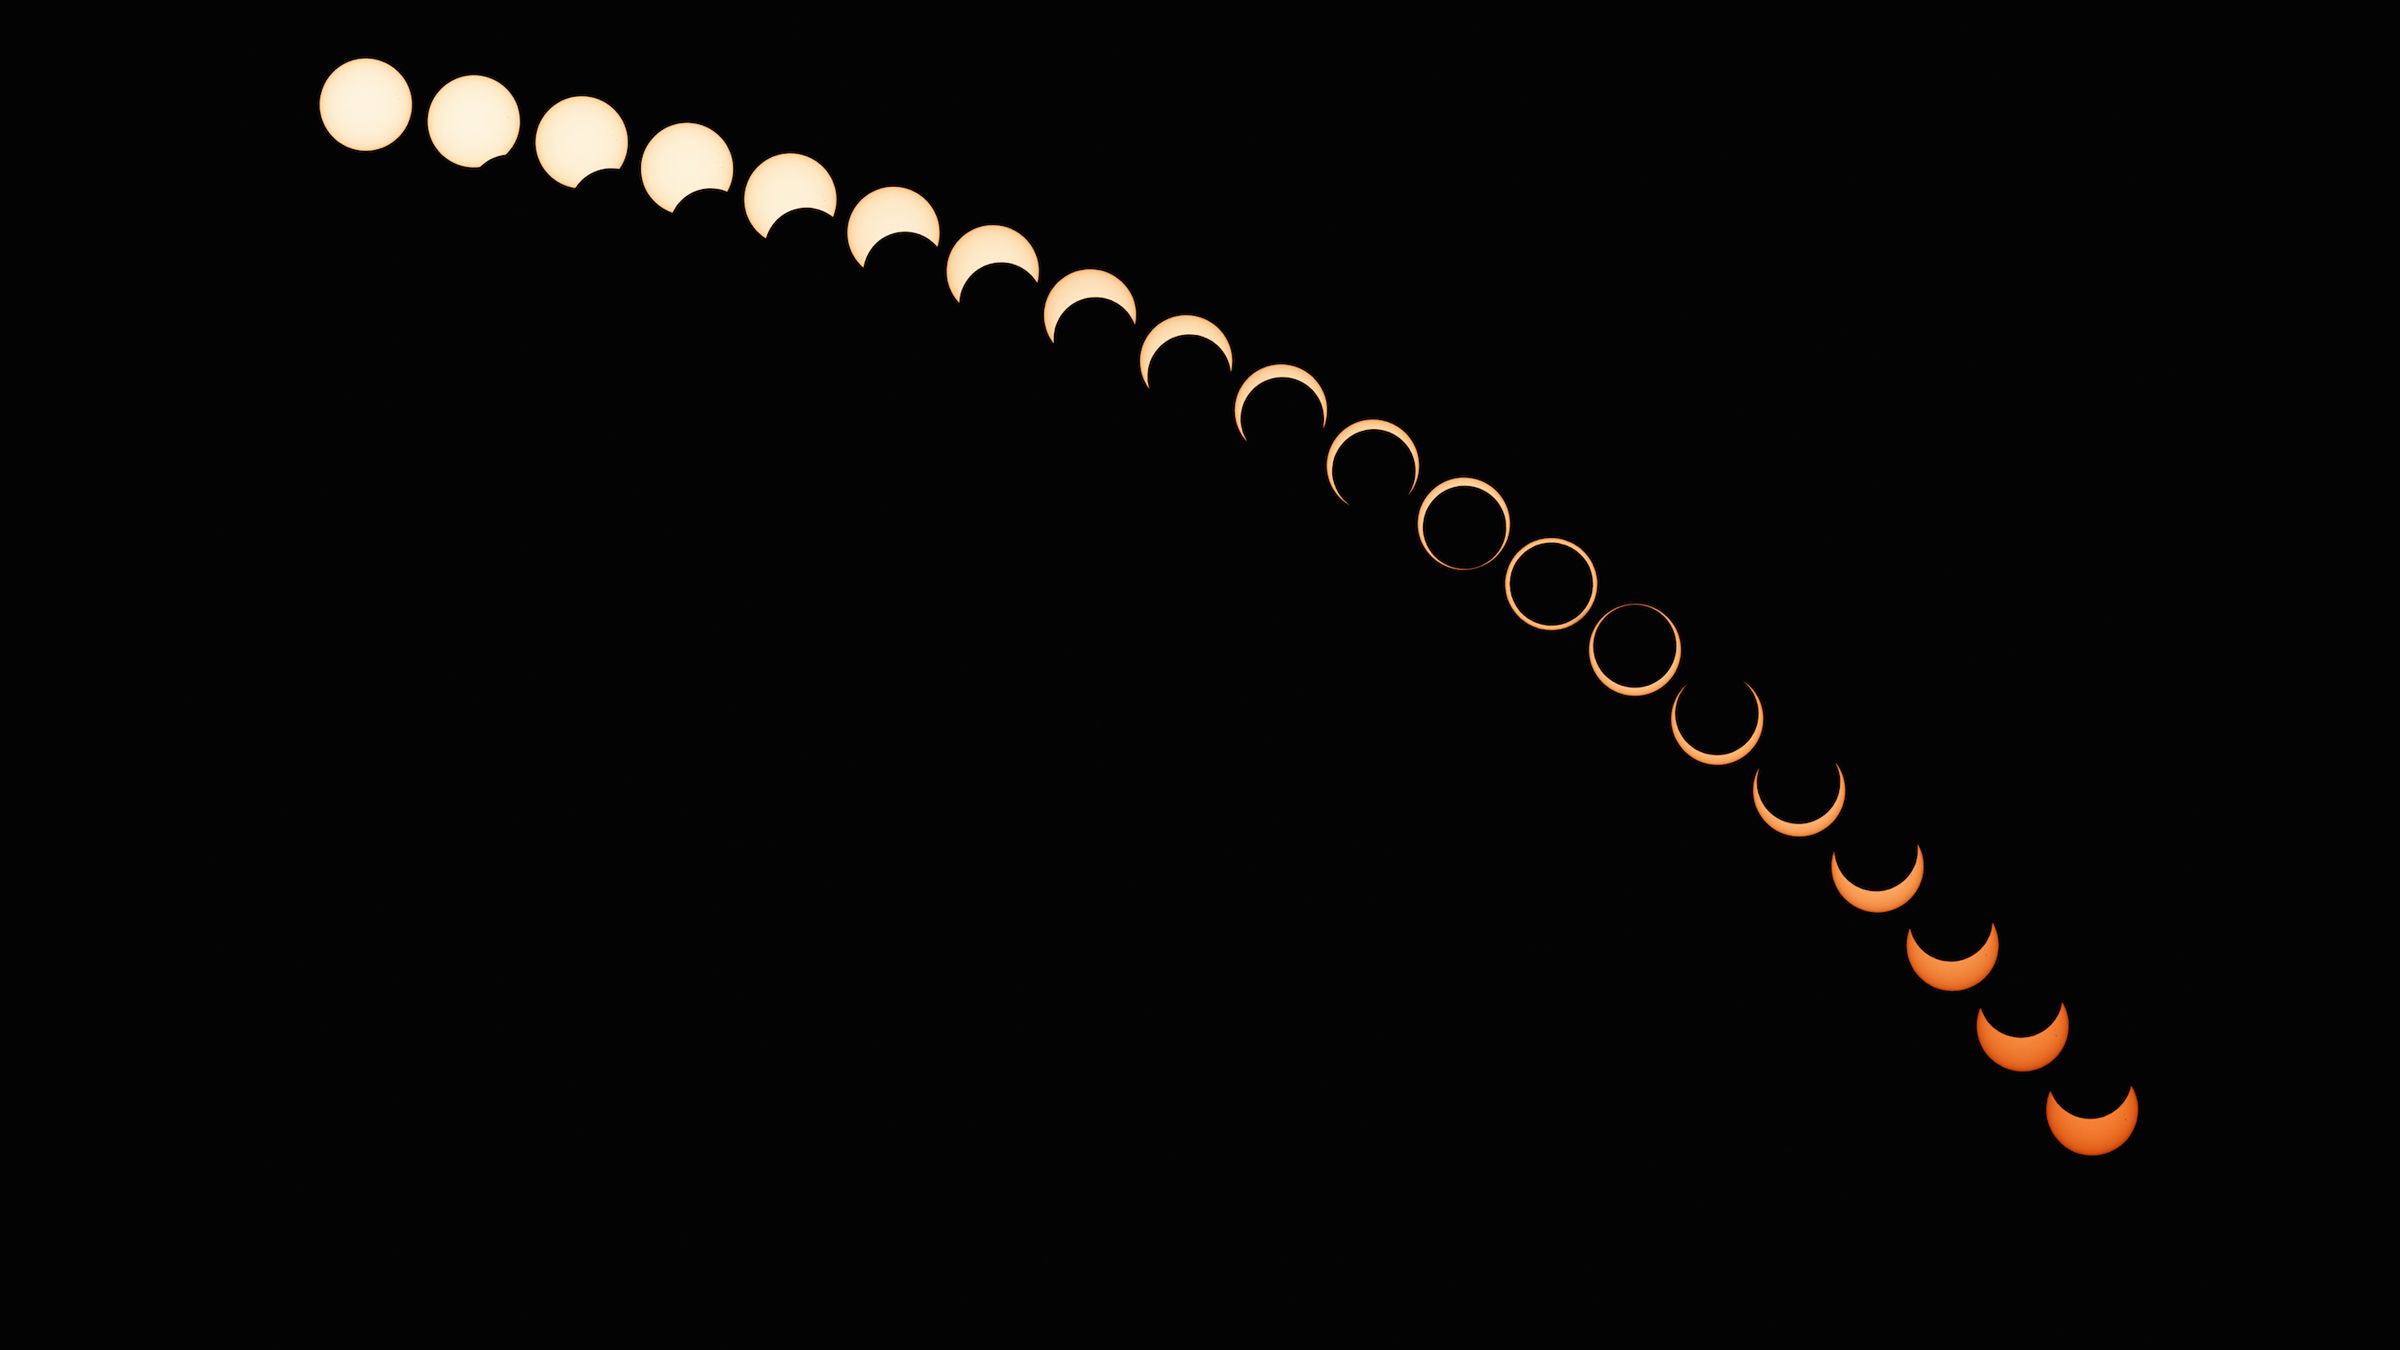 A composite image of the annular solar eclipse on Jan. 15, 2010